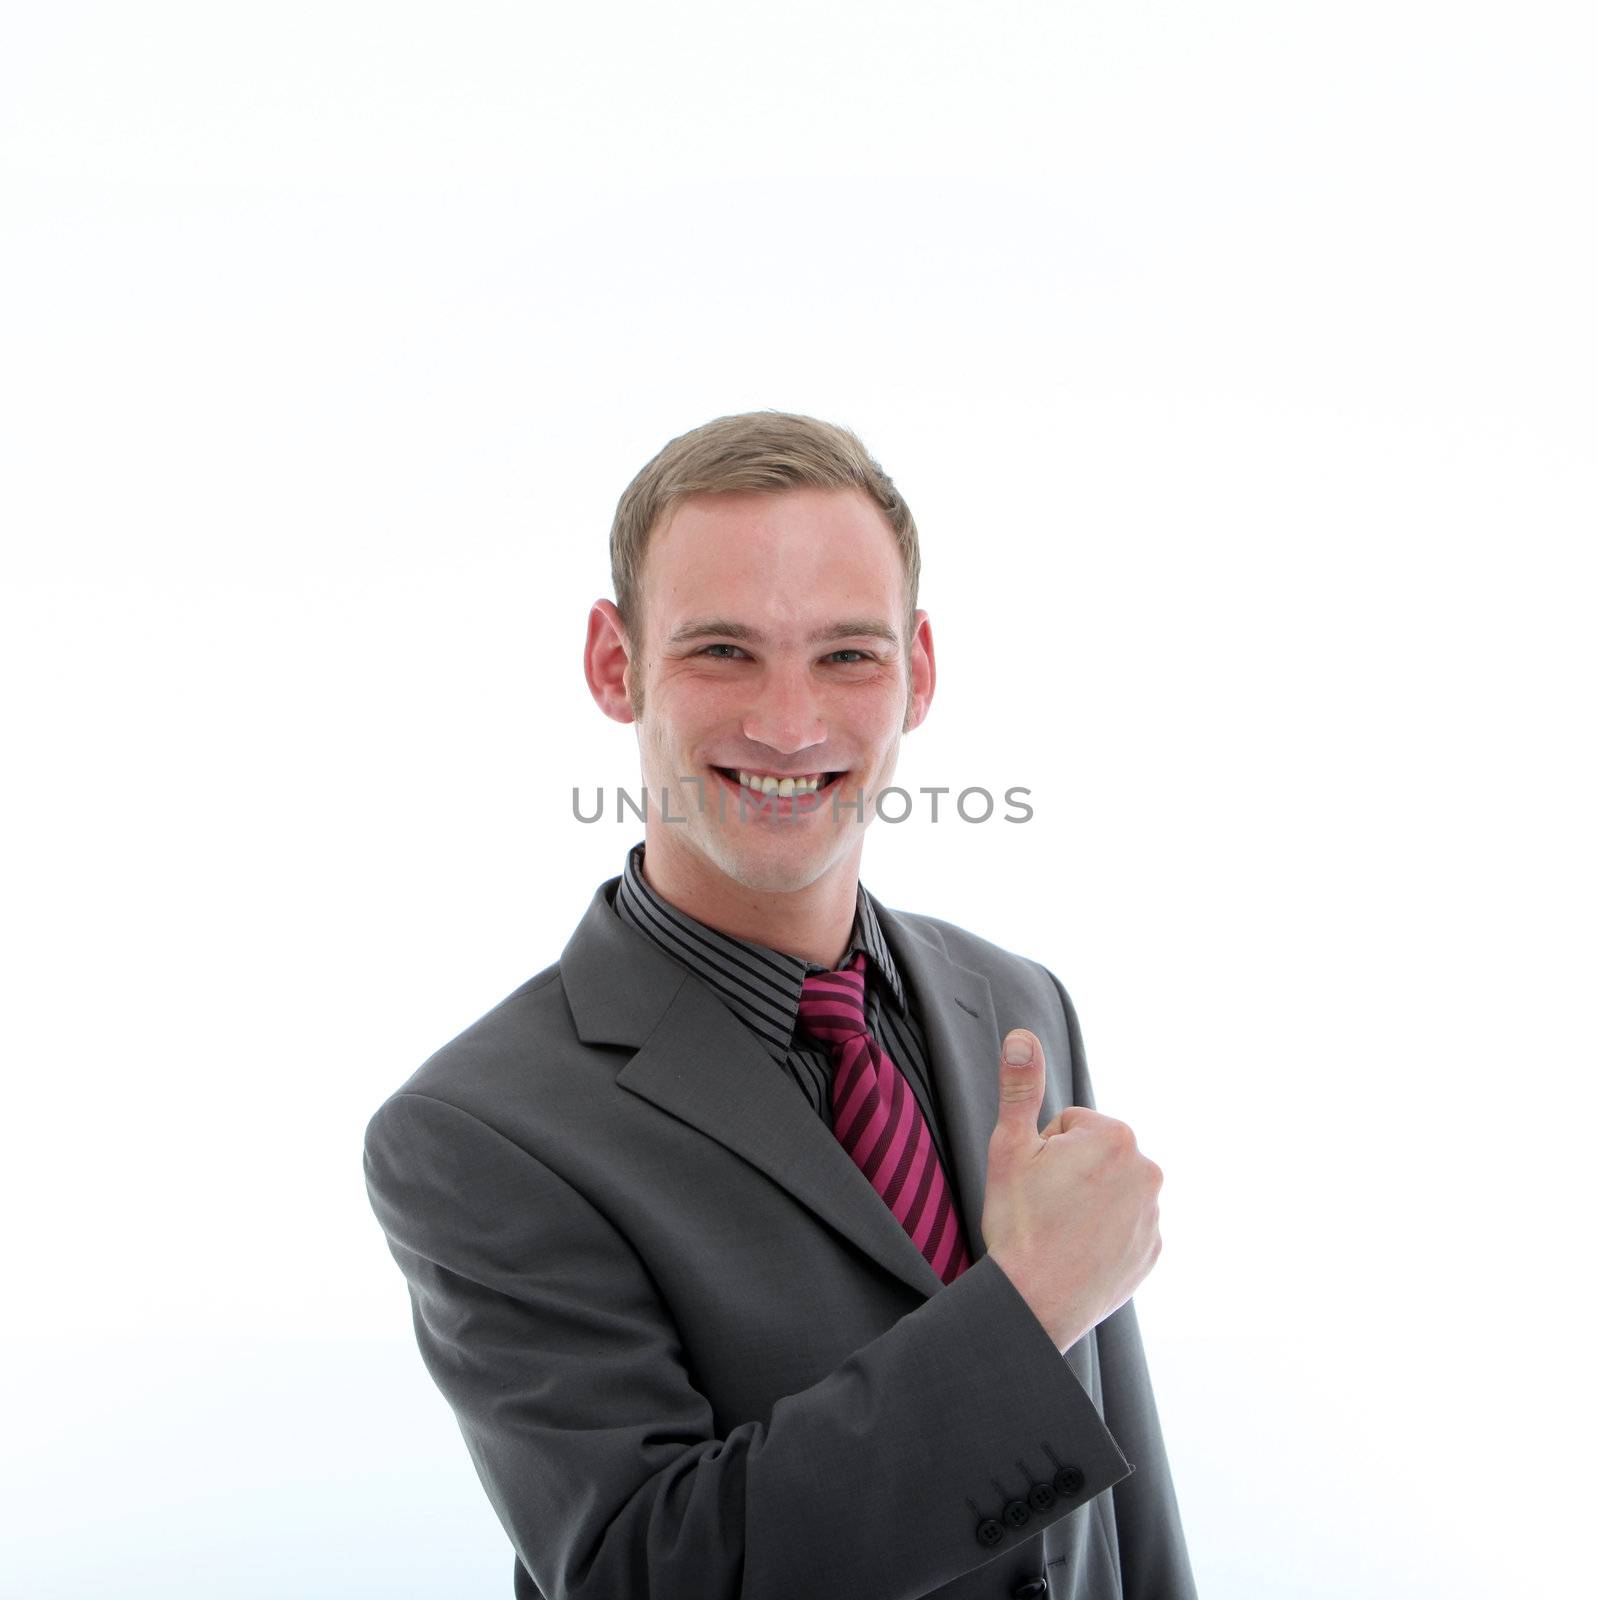 Handsome confident businessman with a broad grin giving a thumbs up gesture of success isolated on white